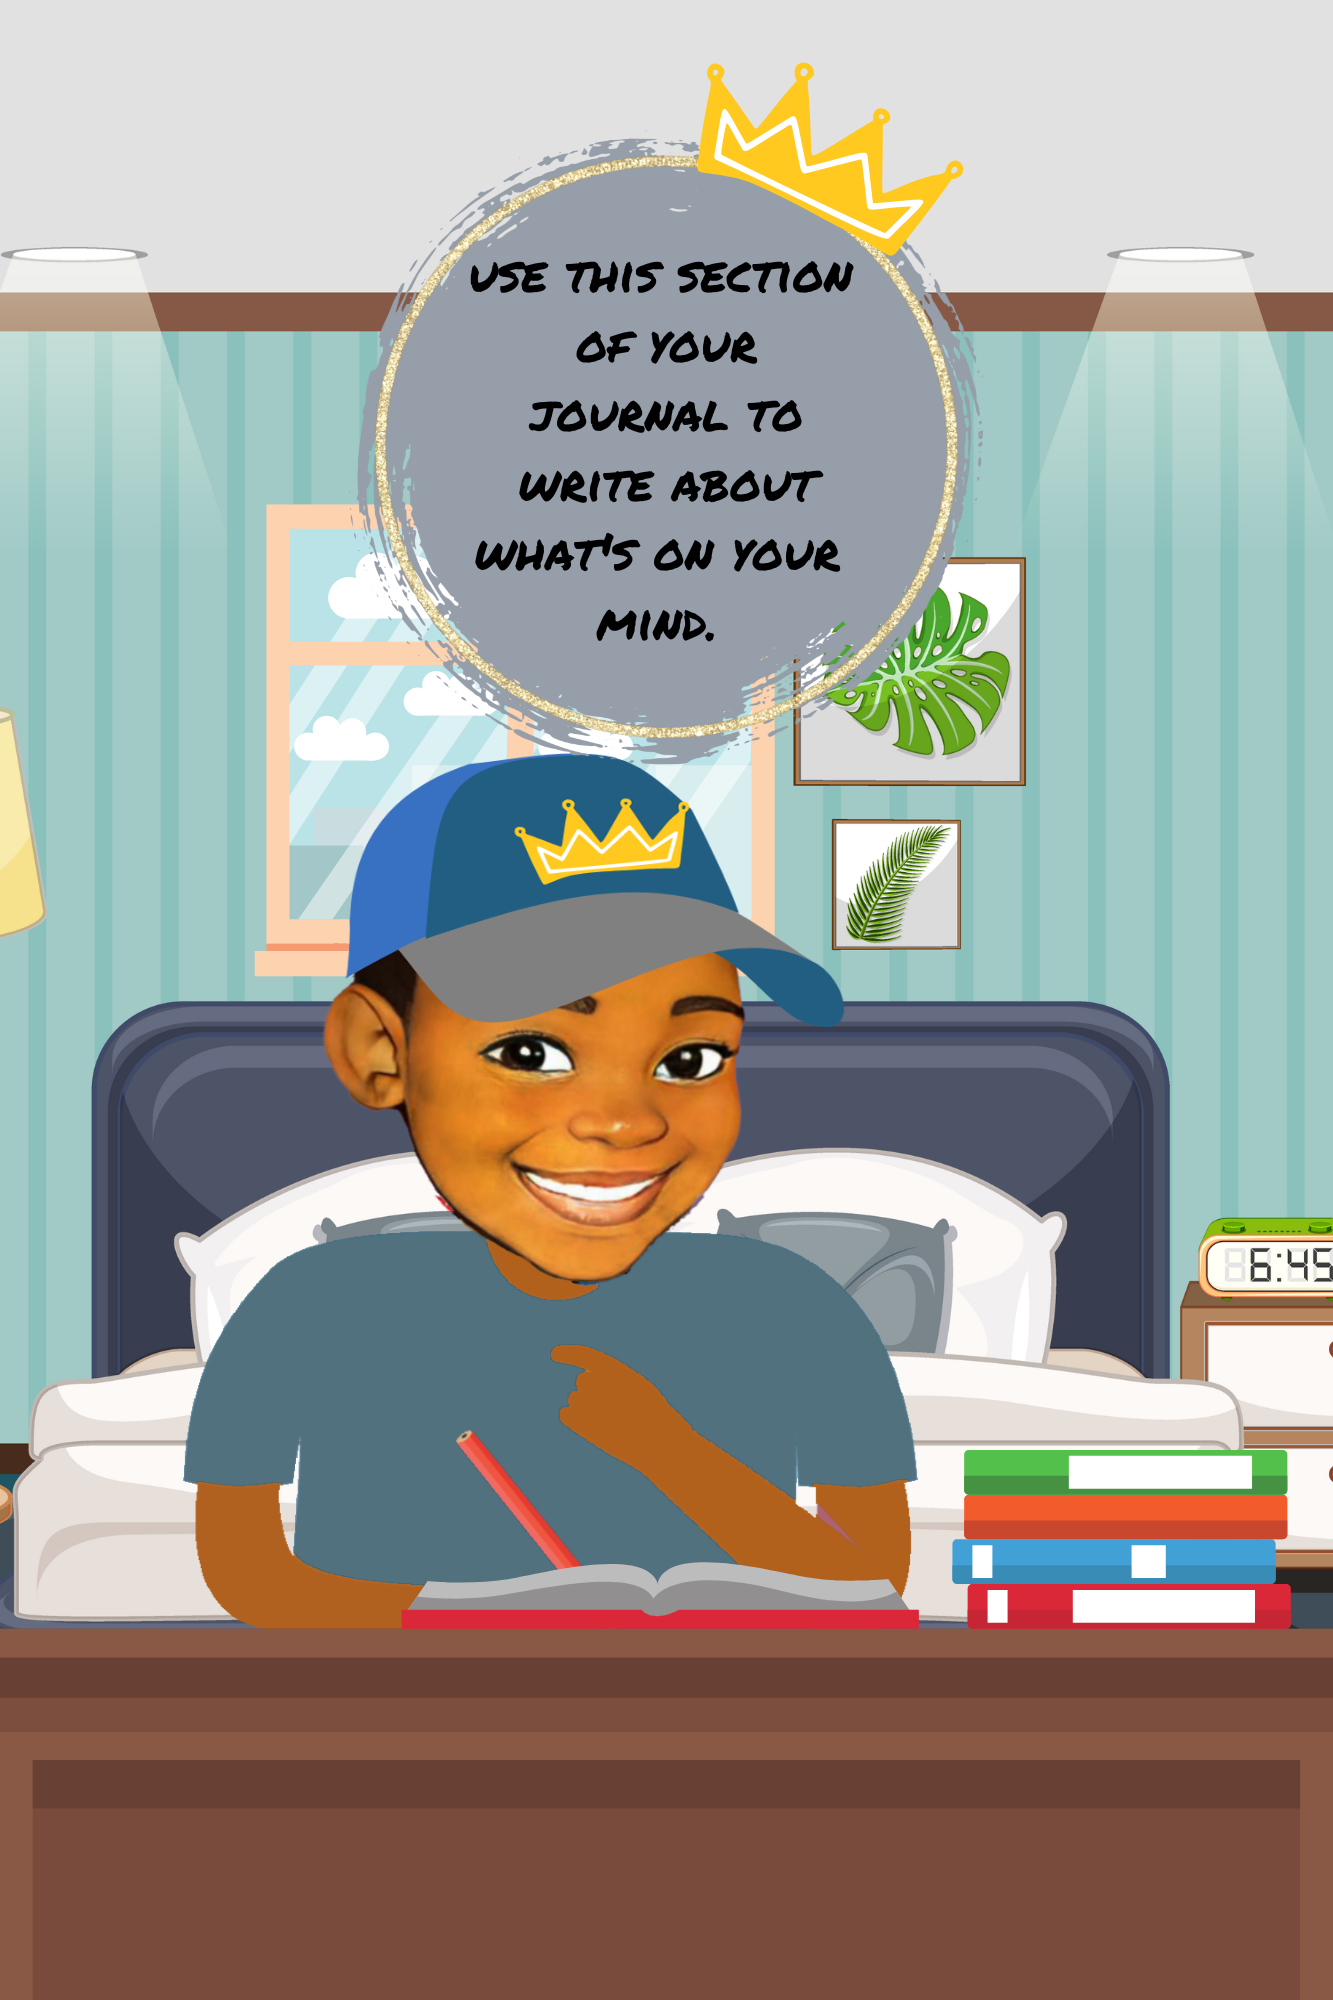 Young King Writing Journal